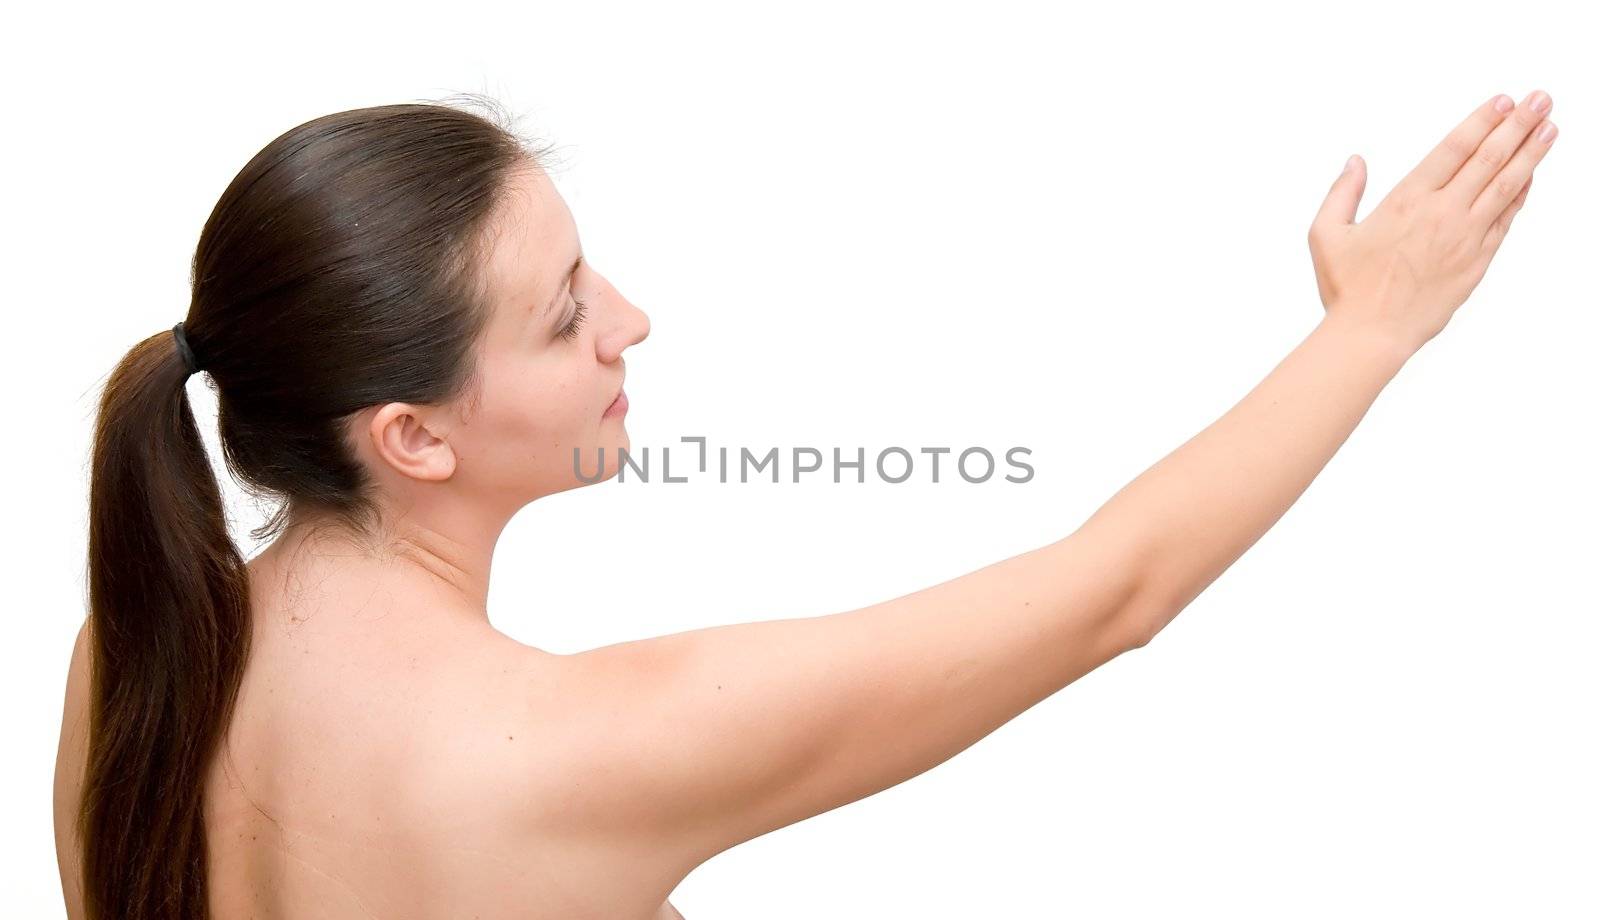 The young woman has stretched a hand on a white background